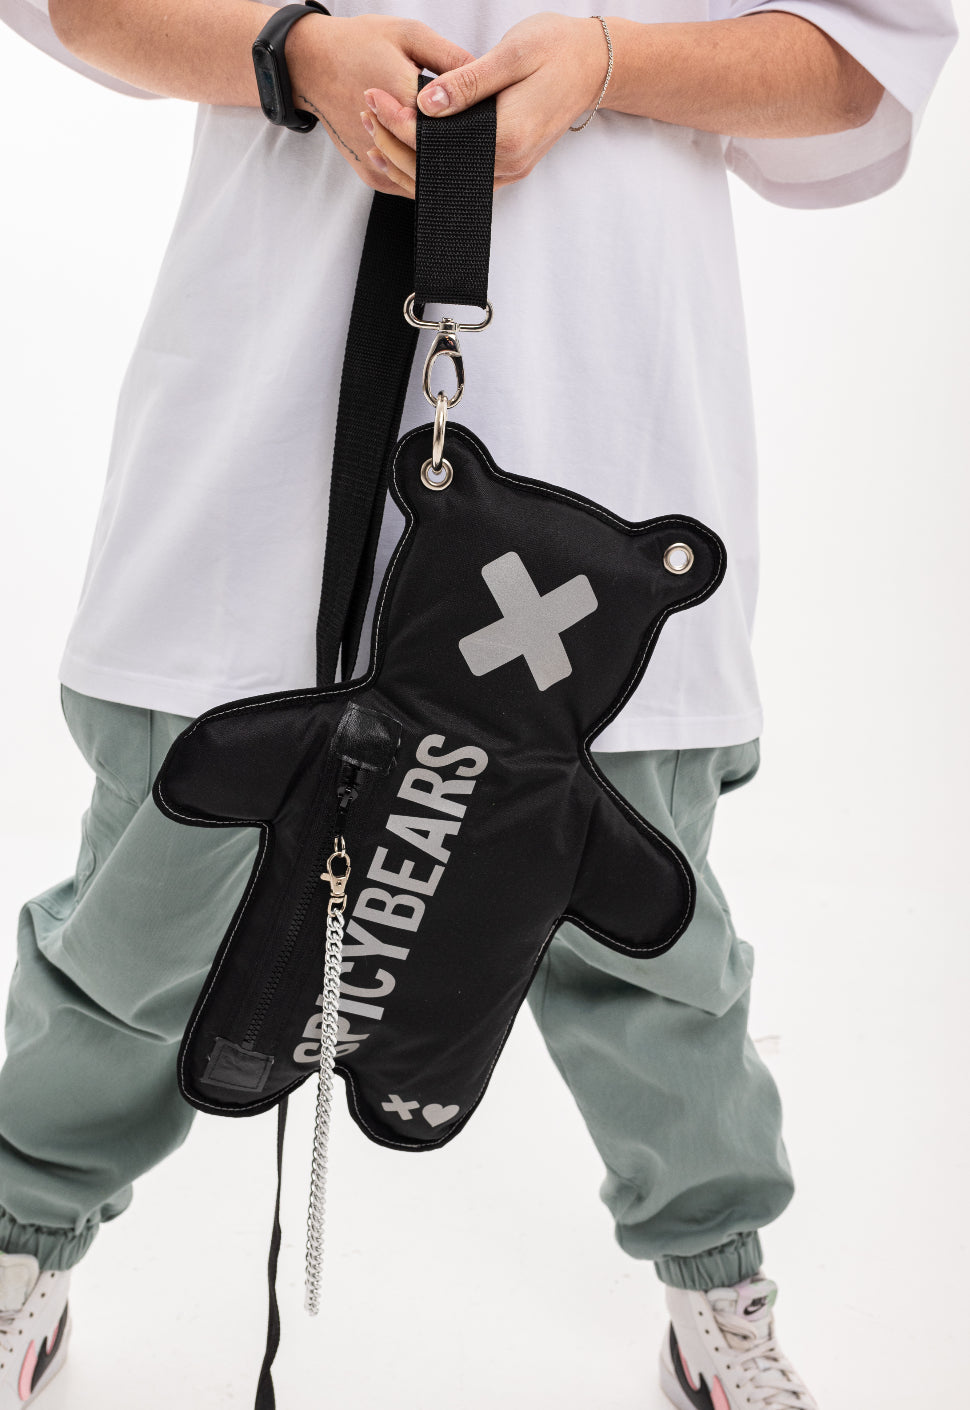 Stand out with the Total Black SPICYBEARS Cross-body Bag with Reflective Print